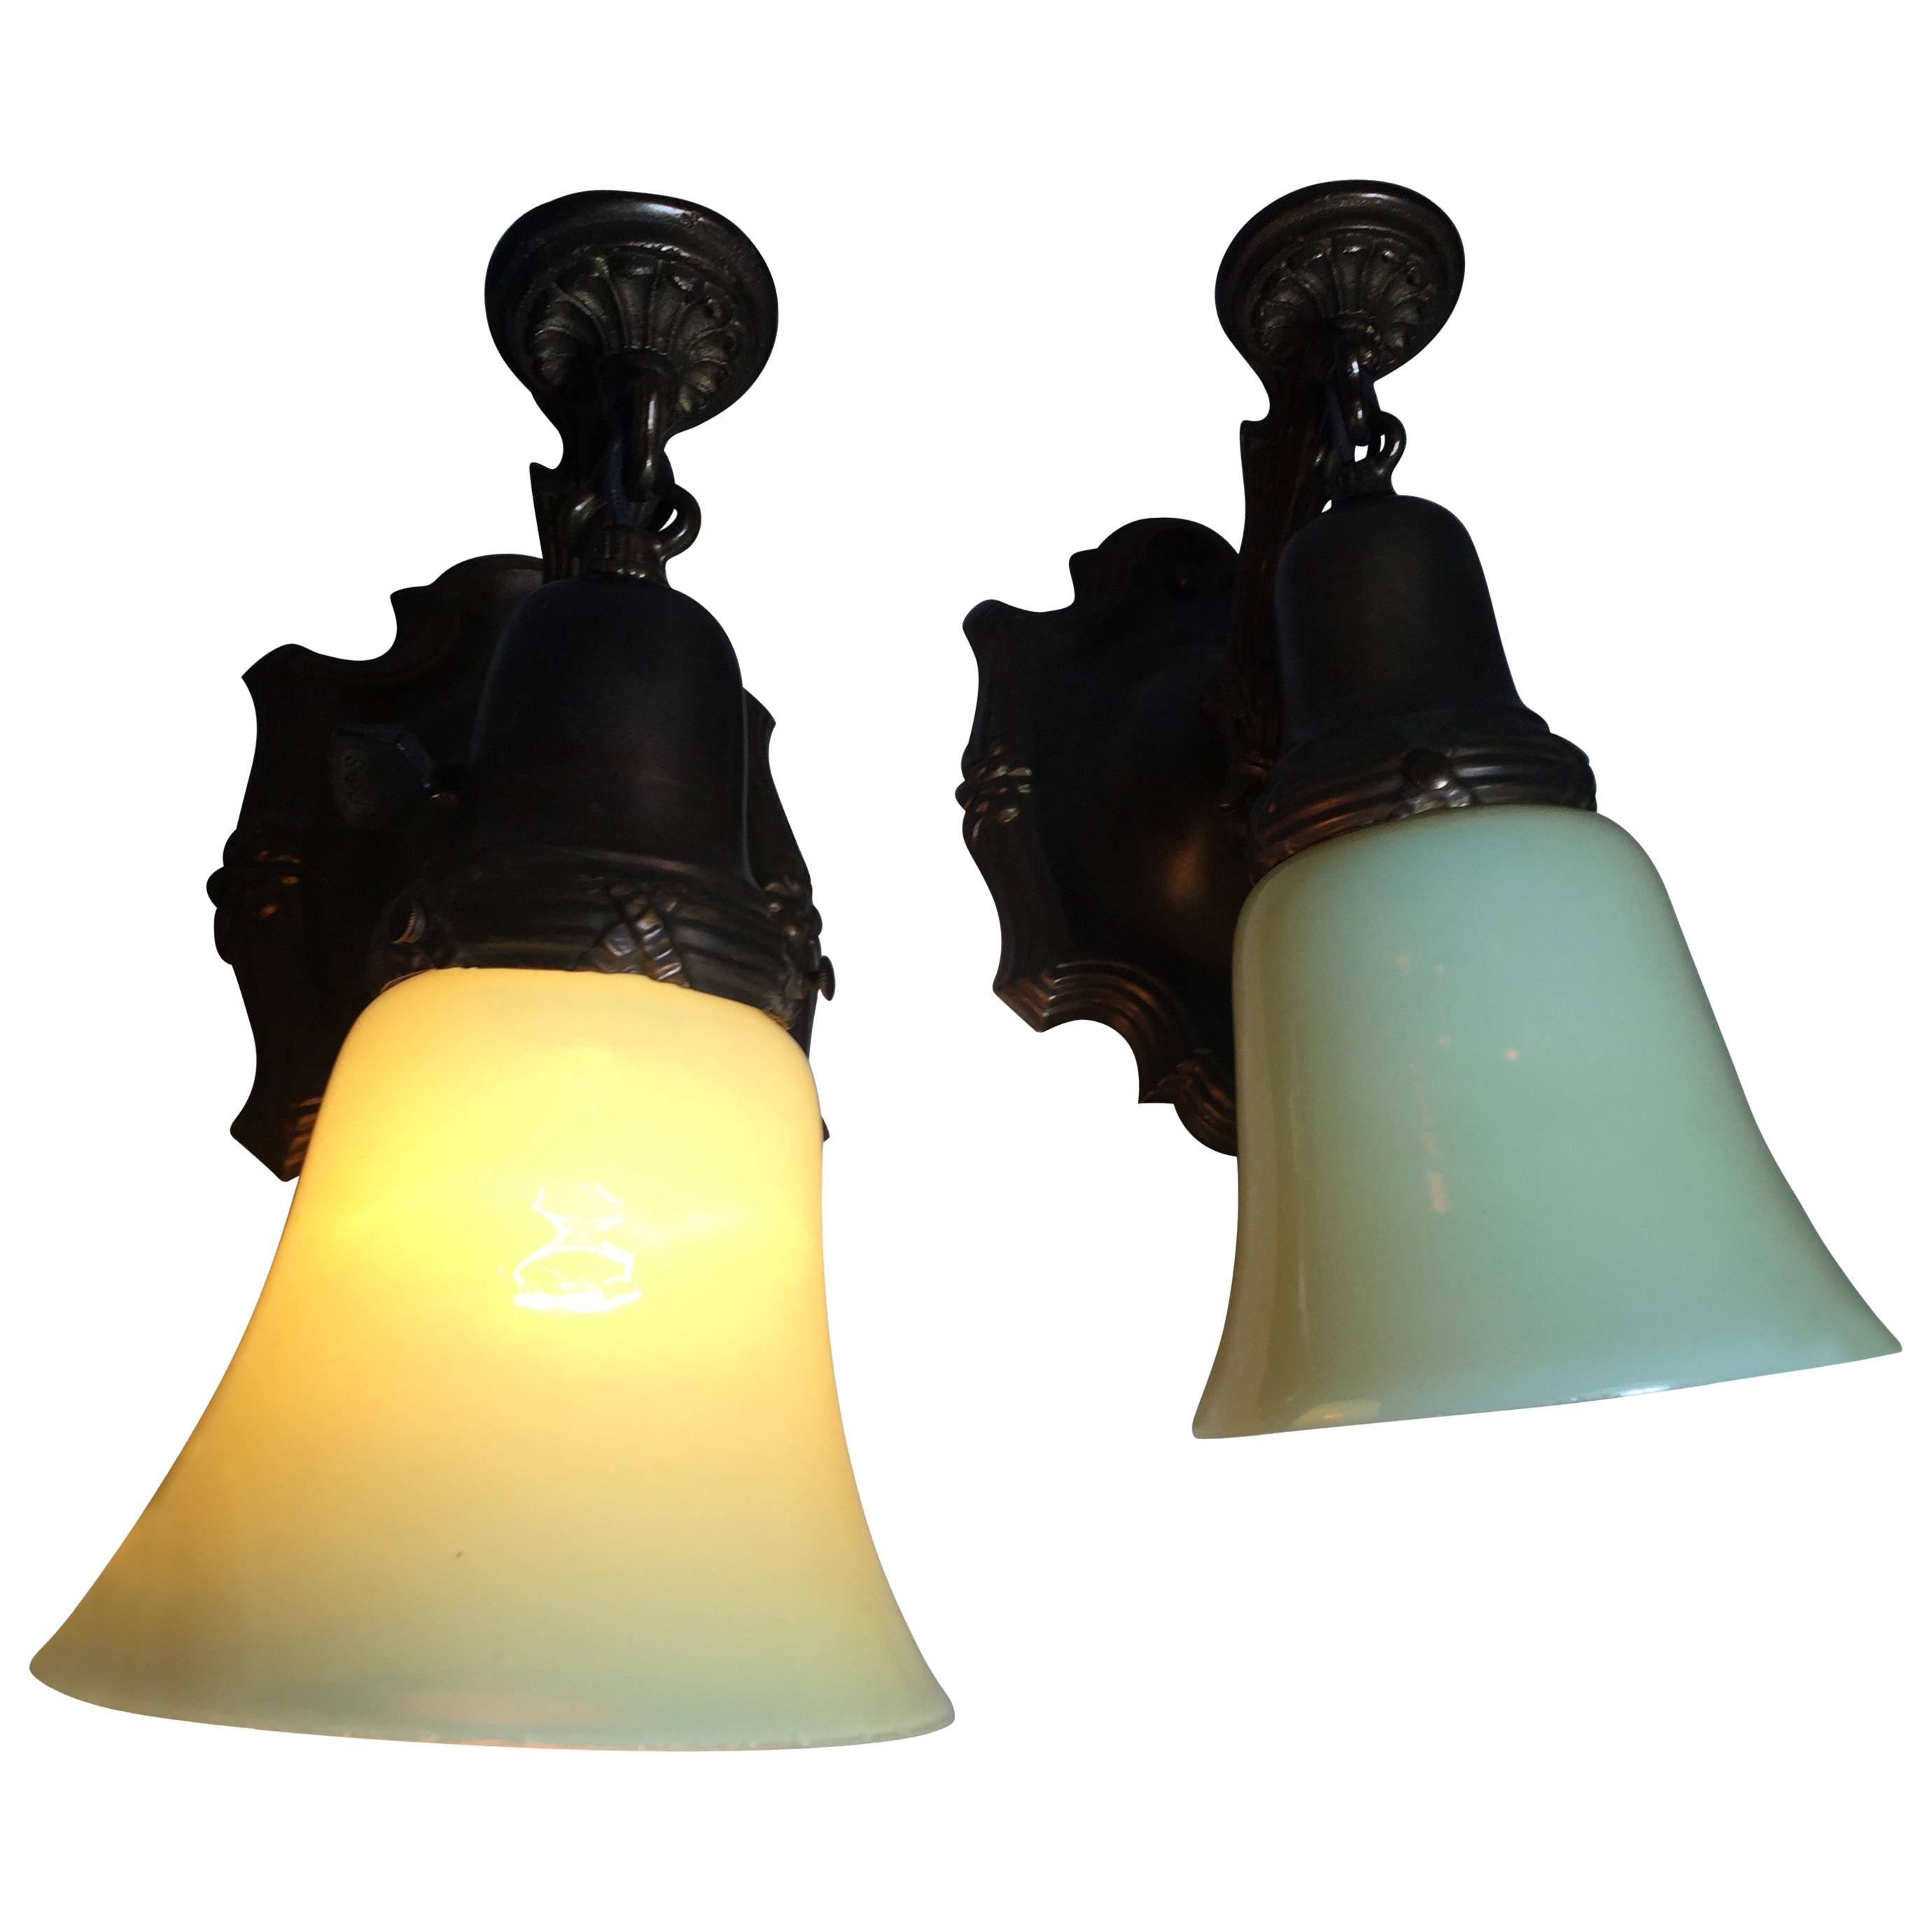 Pair of Edwardian Sconces with Vaseline Glass Shades, circa 1910